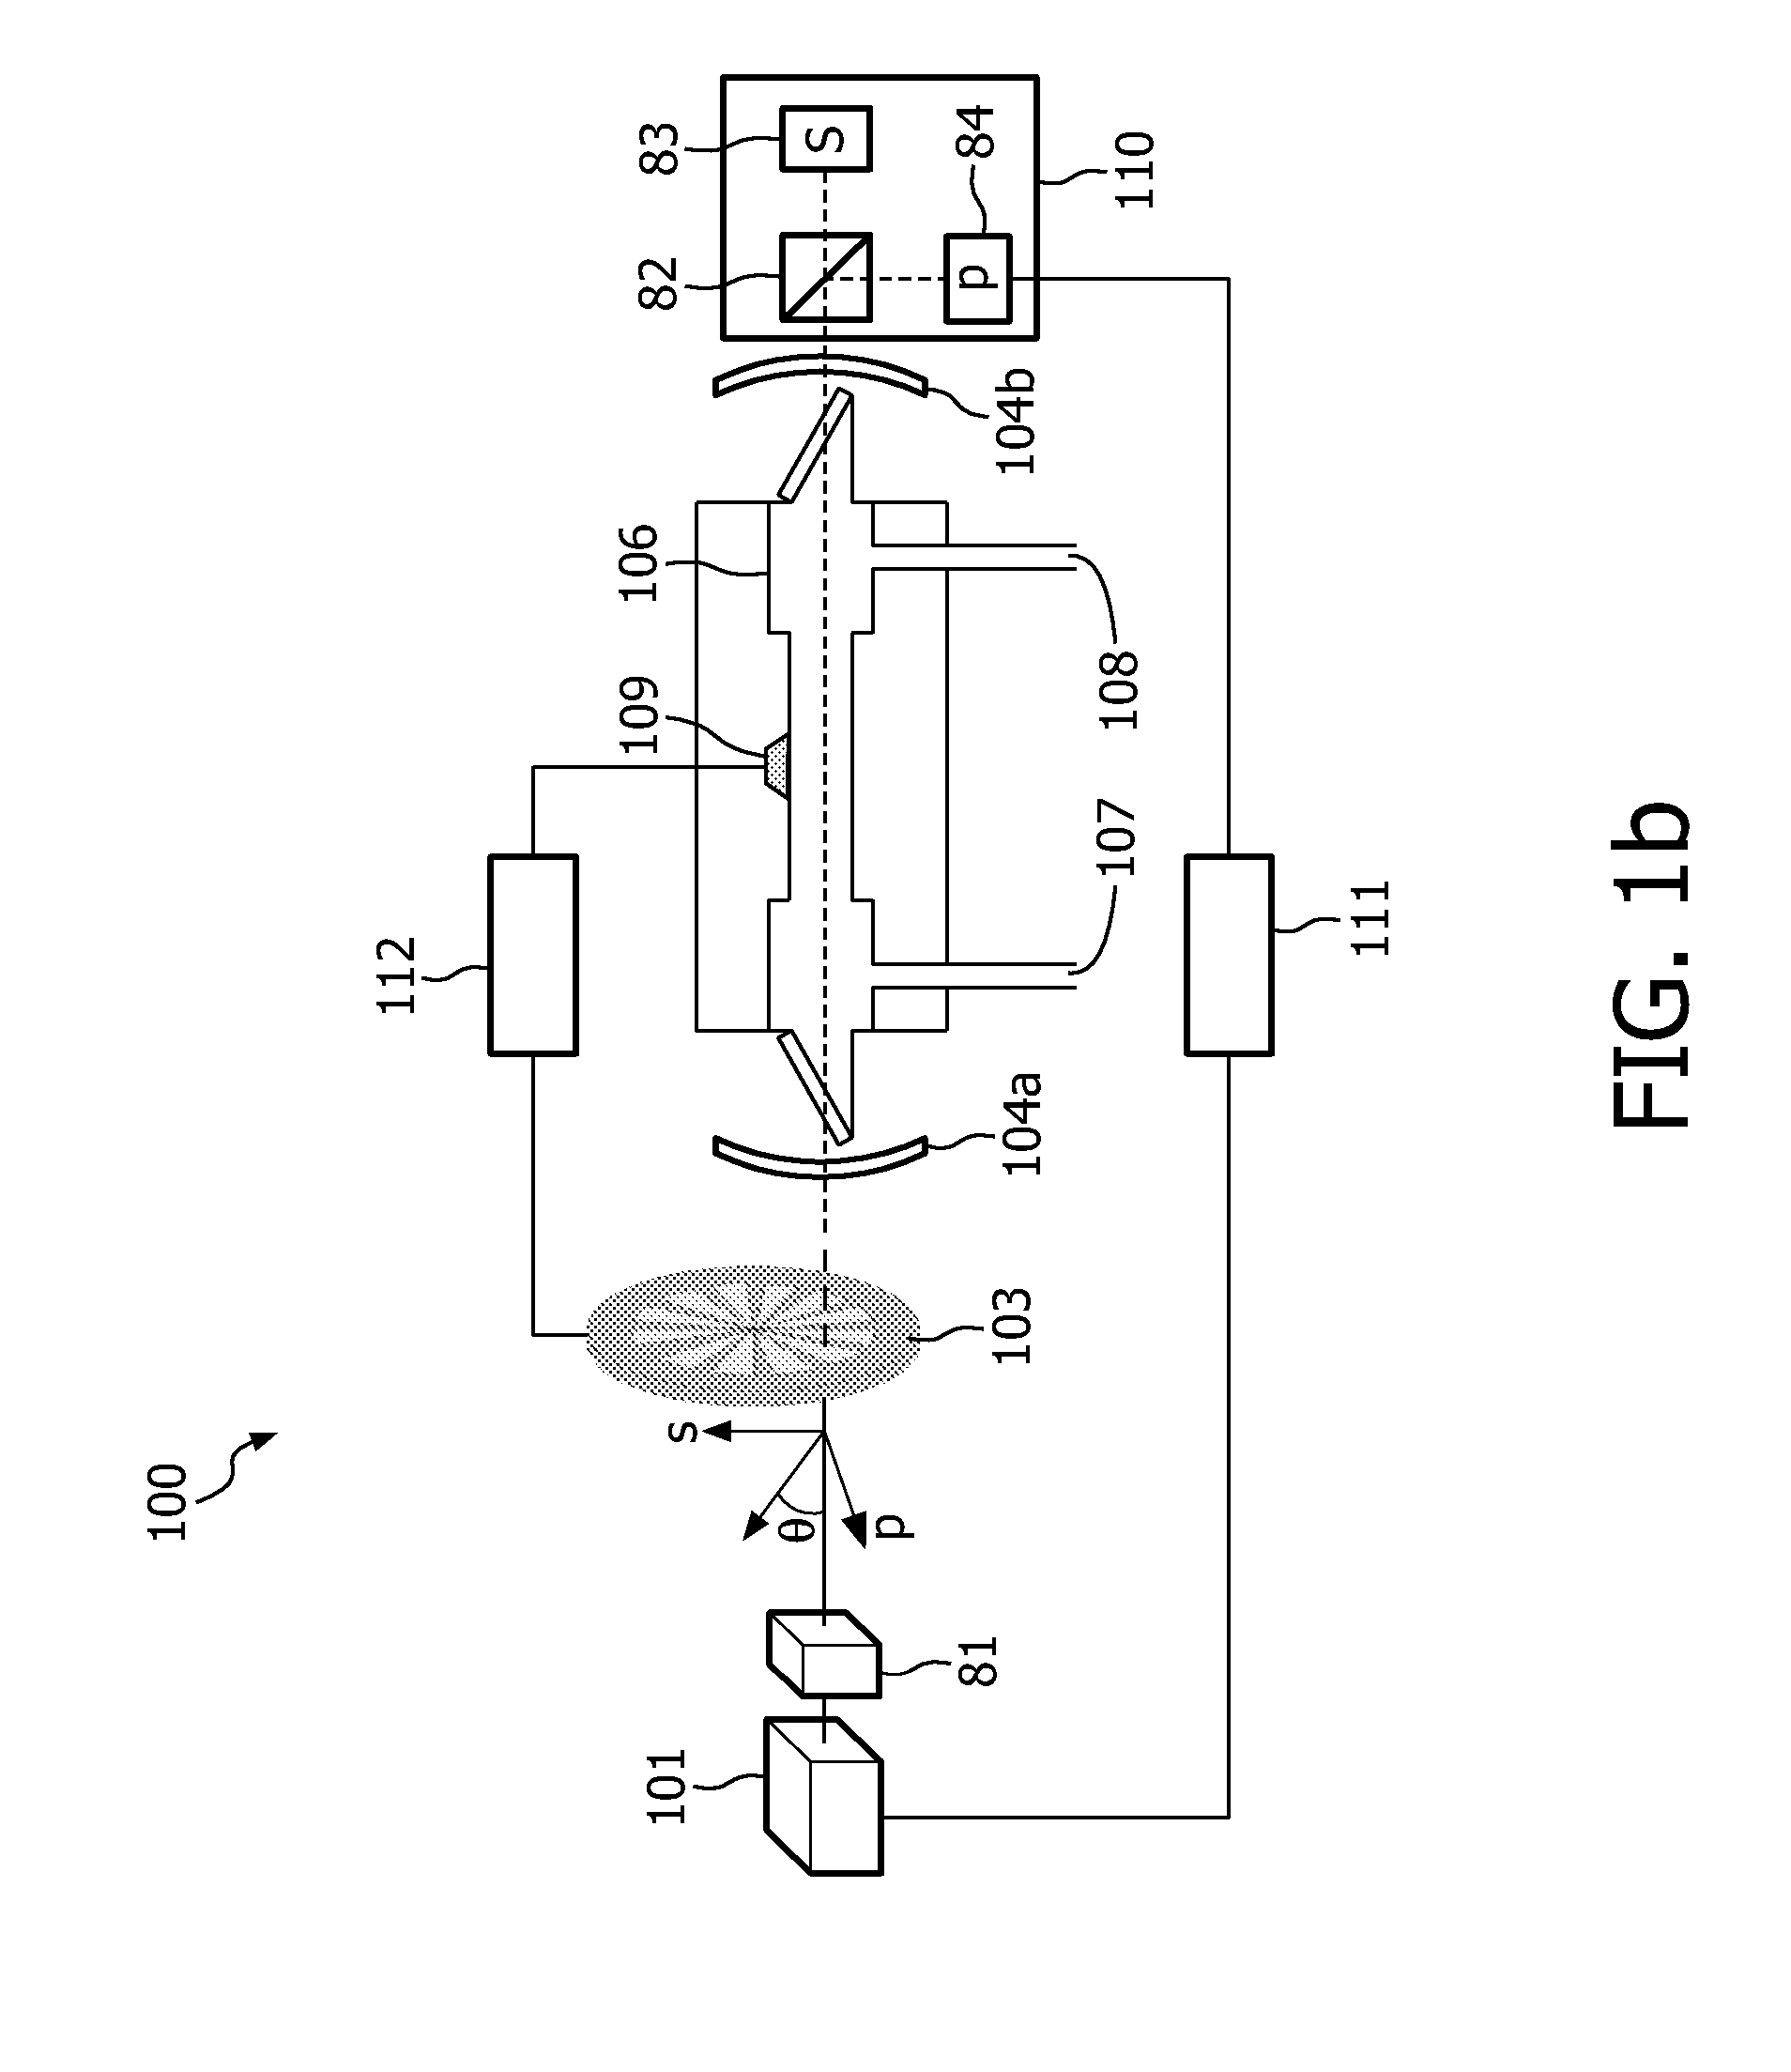 Optical cavity-enhanced photo acoustic trace gas detector with variable light intensity modulator